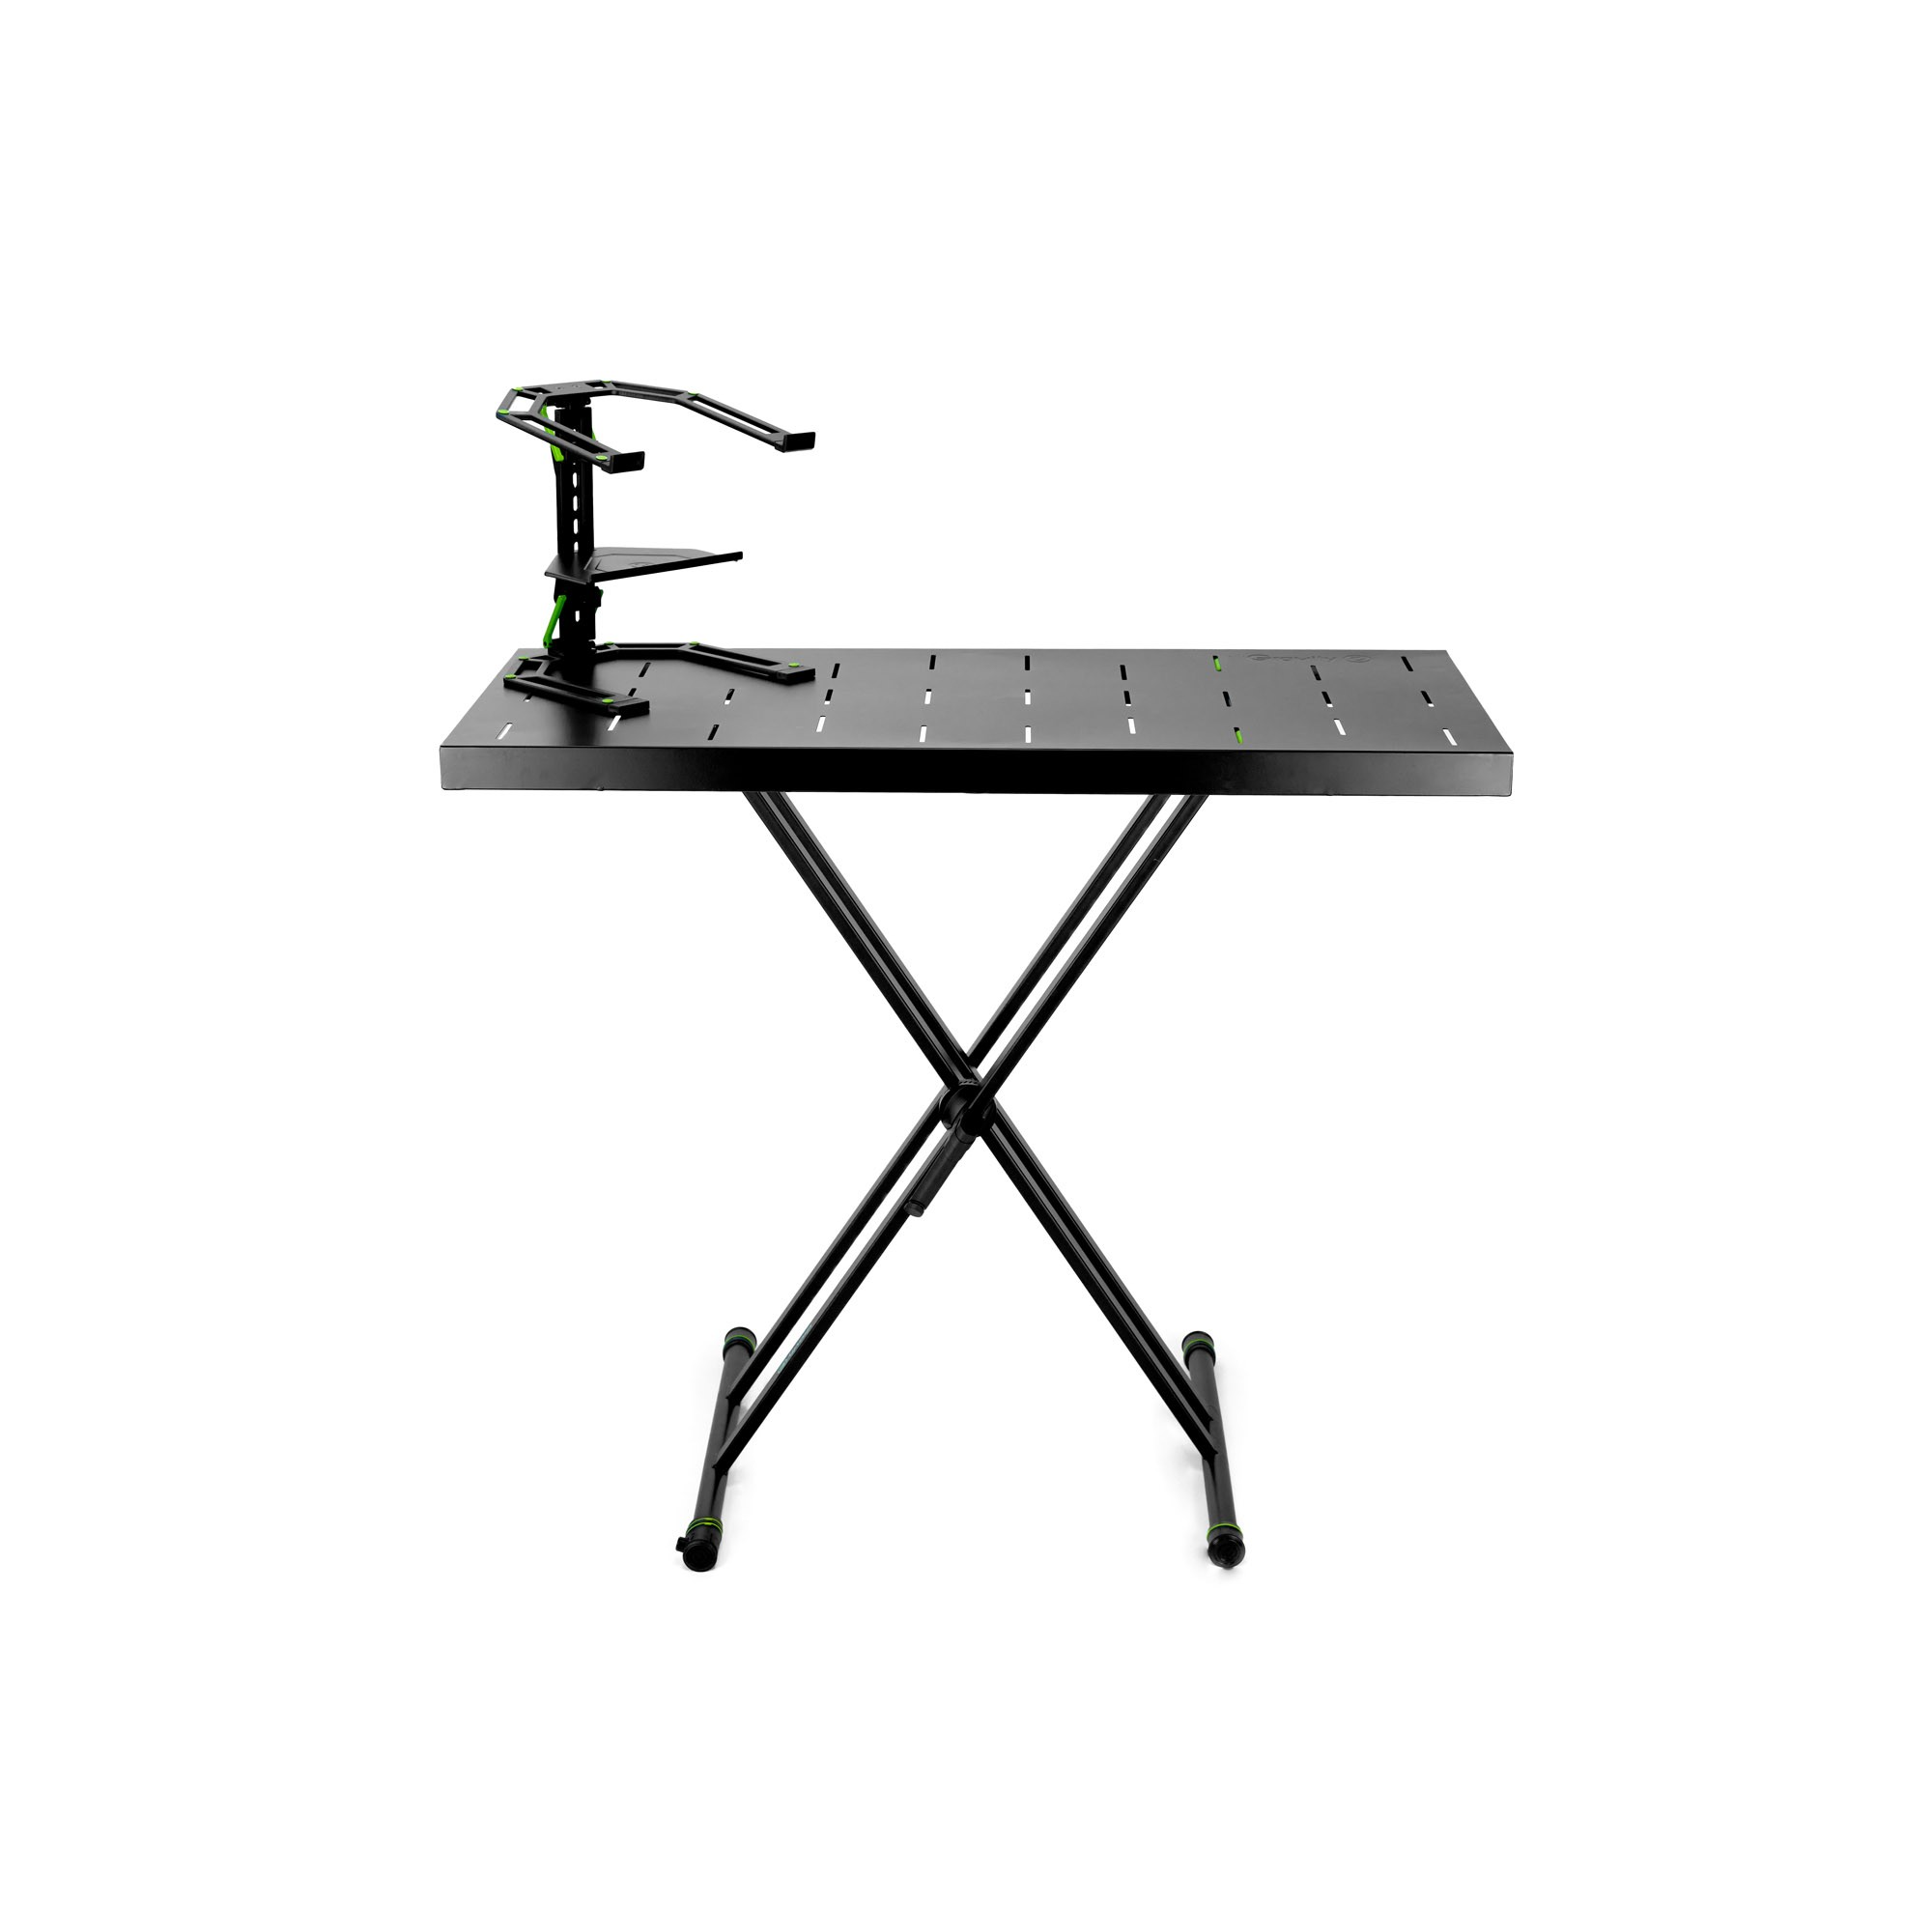 Gravity KSX 2 RD SET 2 Keyboard Stand X-Form Double and Support Table Set 2